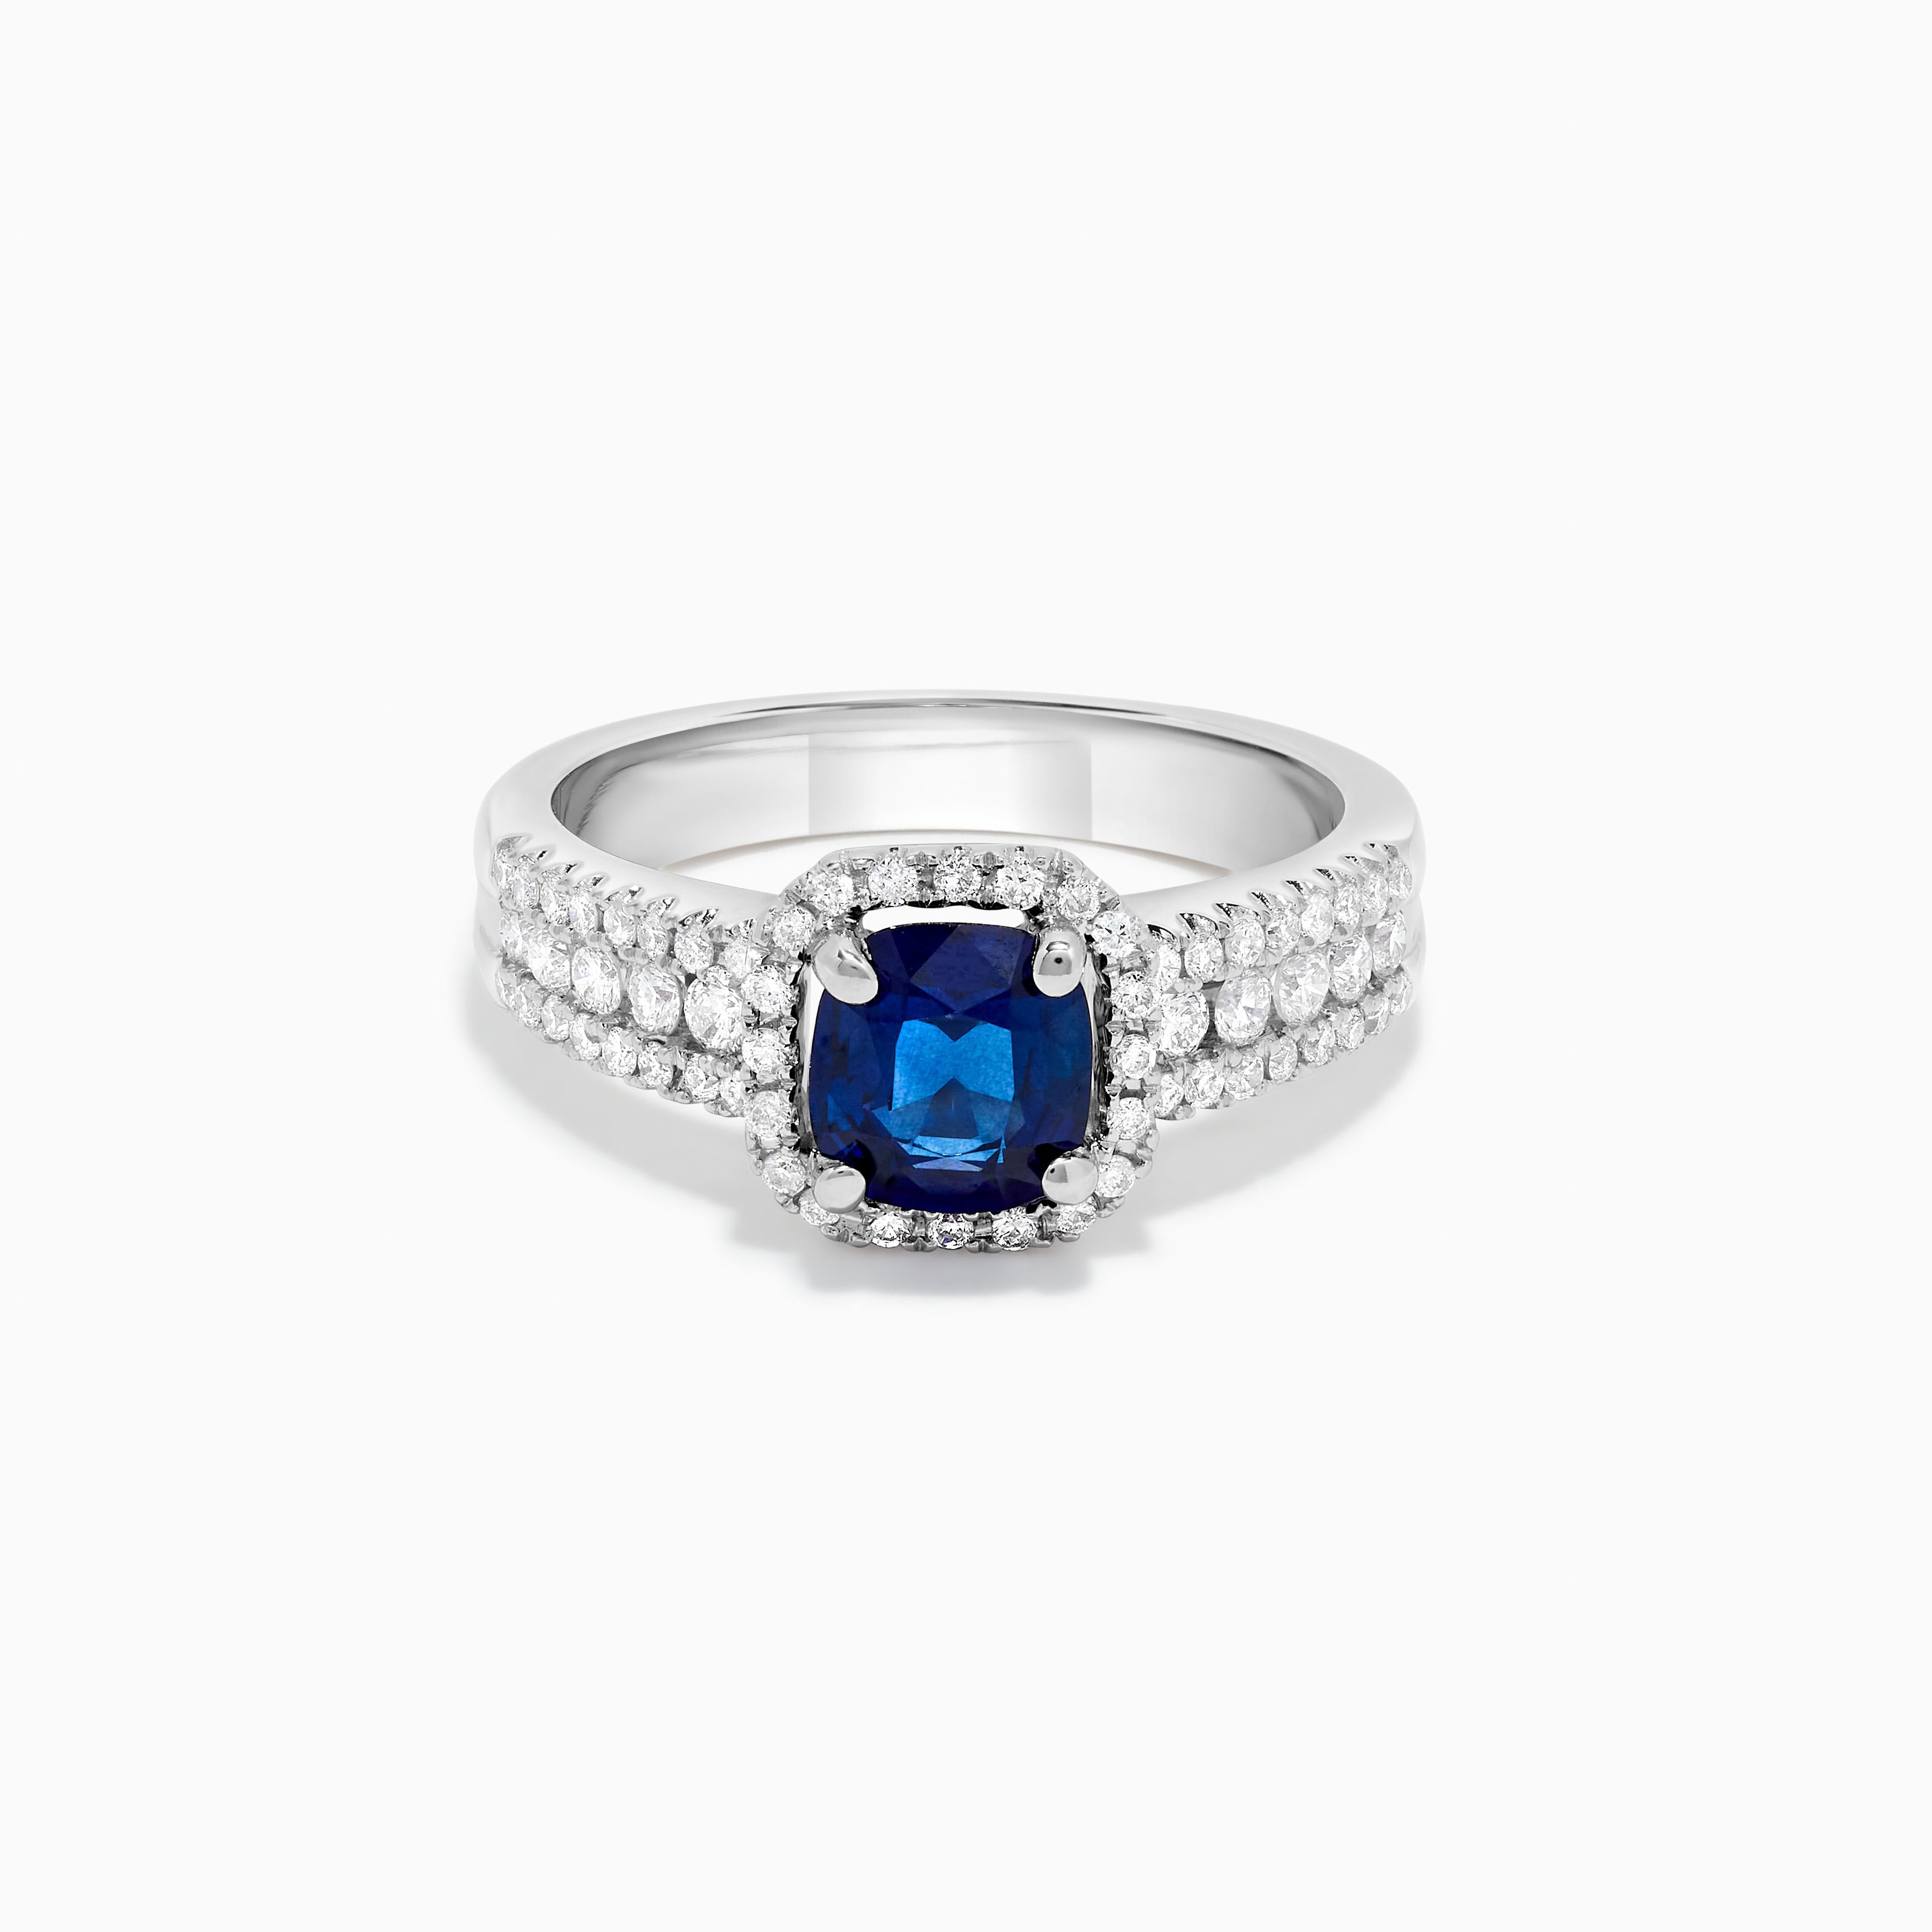 RareGemWorld's classic sapphire ring. Mounted in a beautiful 14K White Gold setting with a natural cushion cut blue sapphire. The sapphire is surrounded by natural round white diamond melee. This ring is guaranteed to impress and enhance your